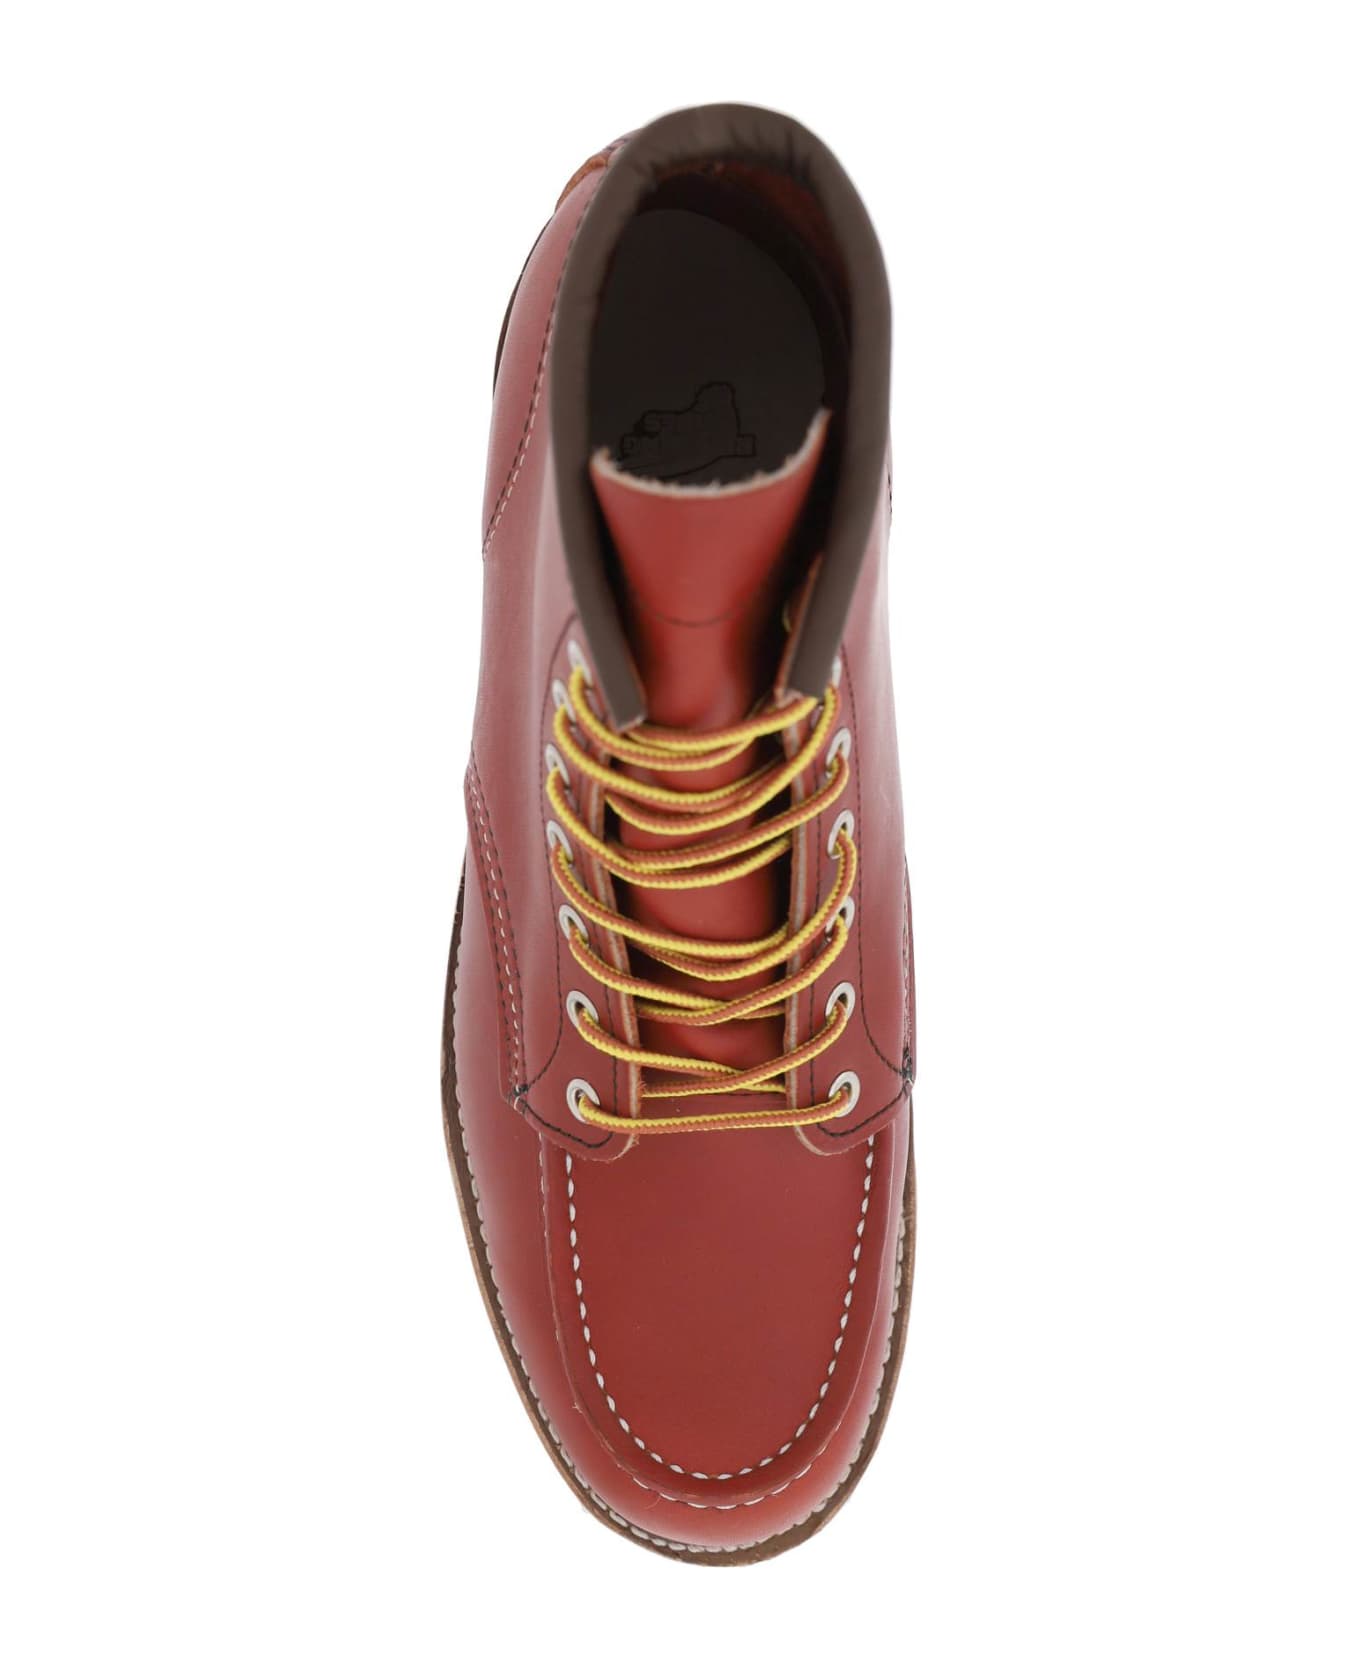 Red Wing Classic Moc Ankle Boots - ORO RUSSET (Red)